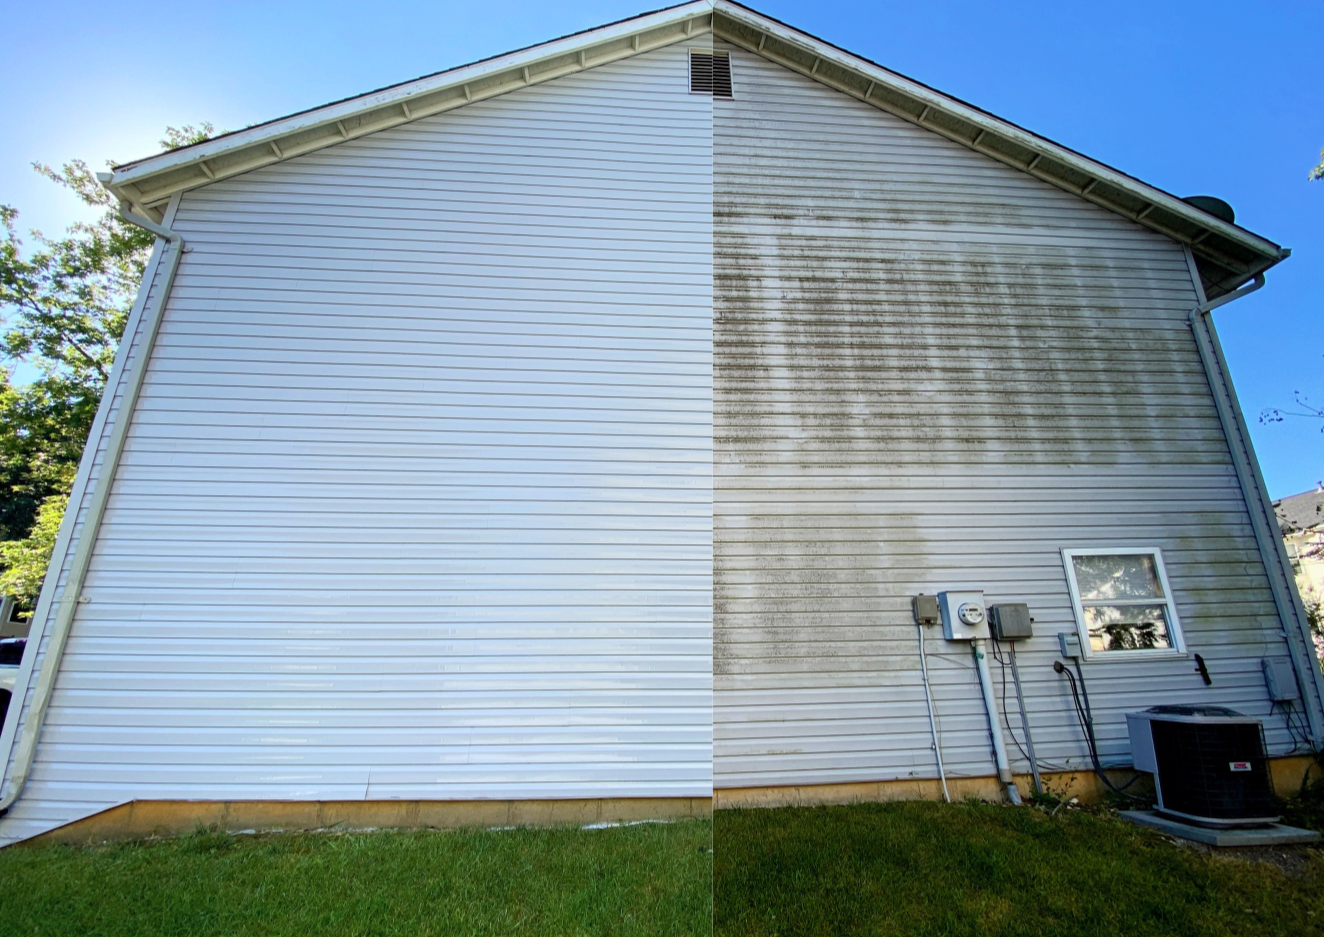 A house with a white siding

Description automatically generated with medium confidence